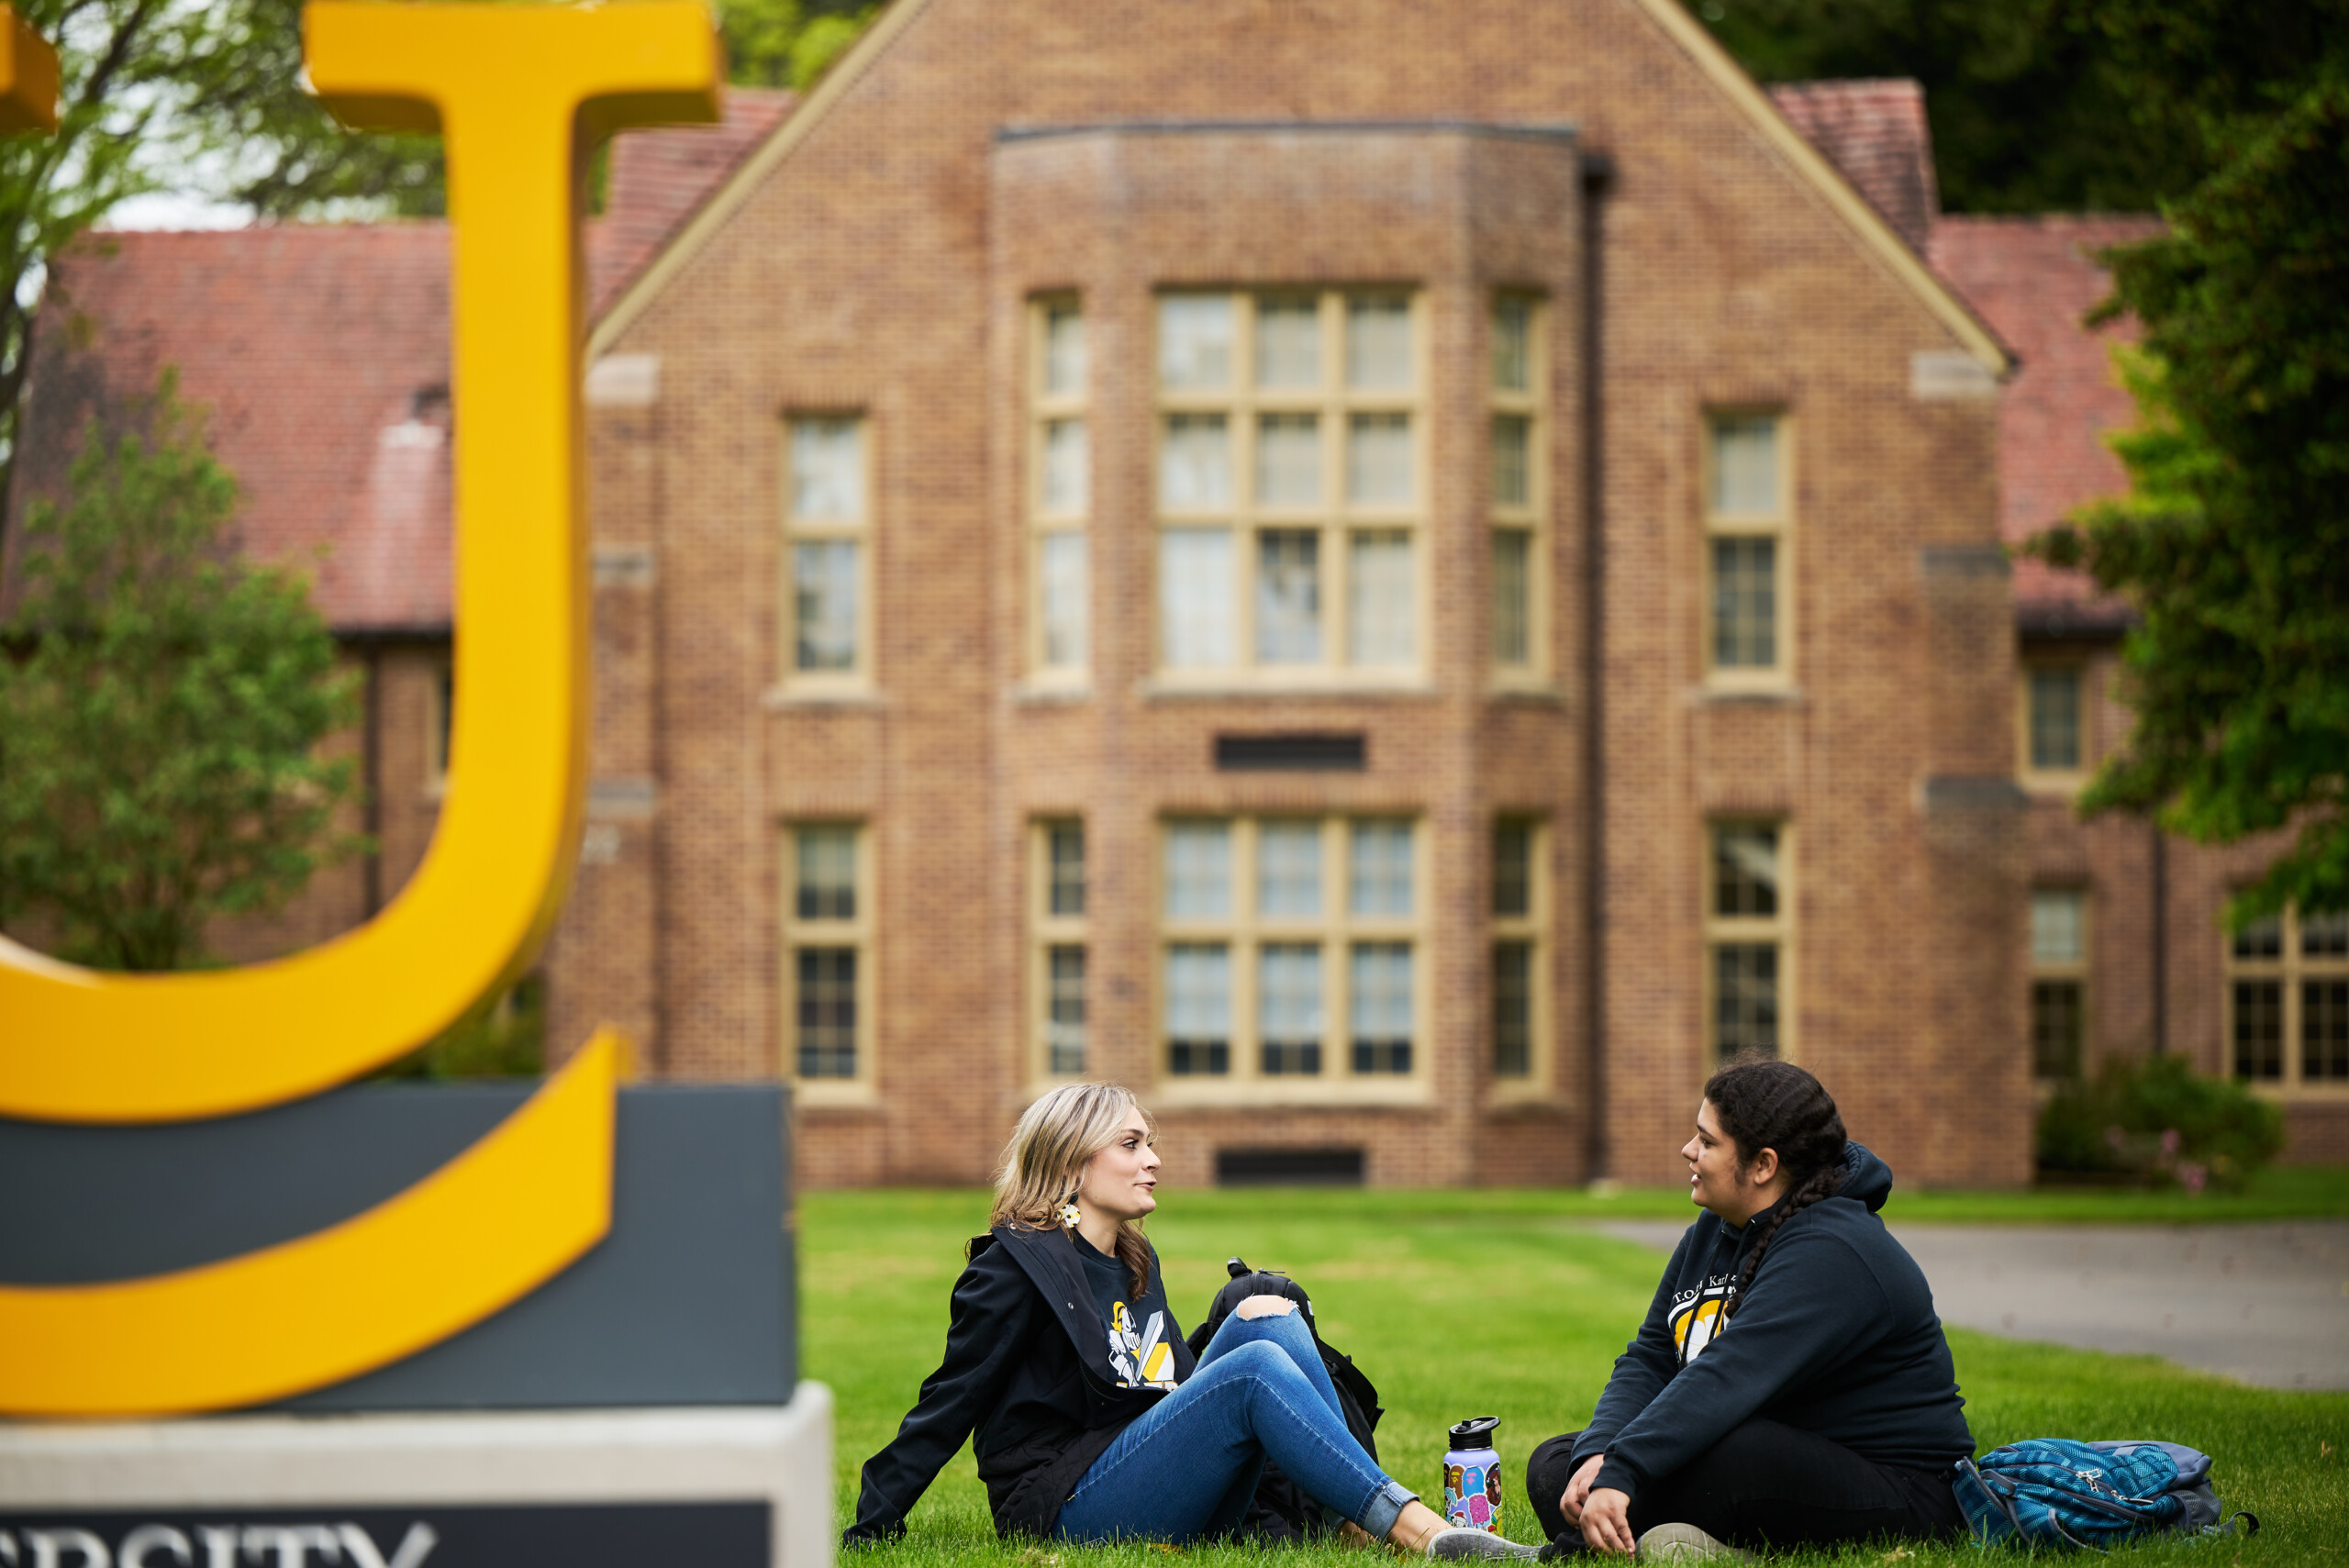 Two female students in black sweaters and jeans sit in the grass behind the PLU sign in front of a building.